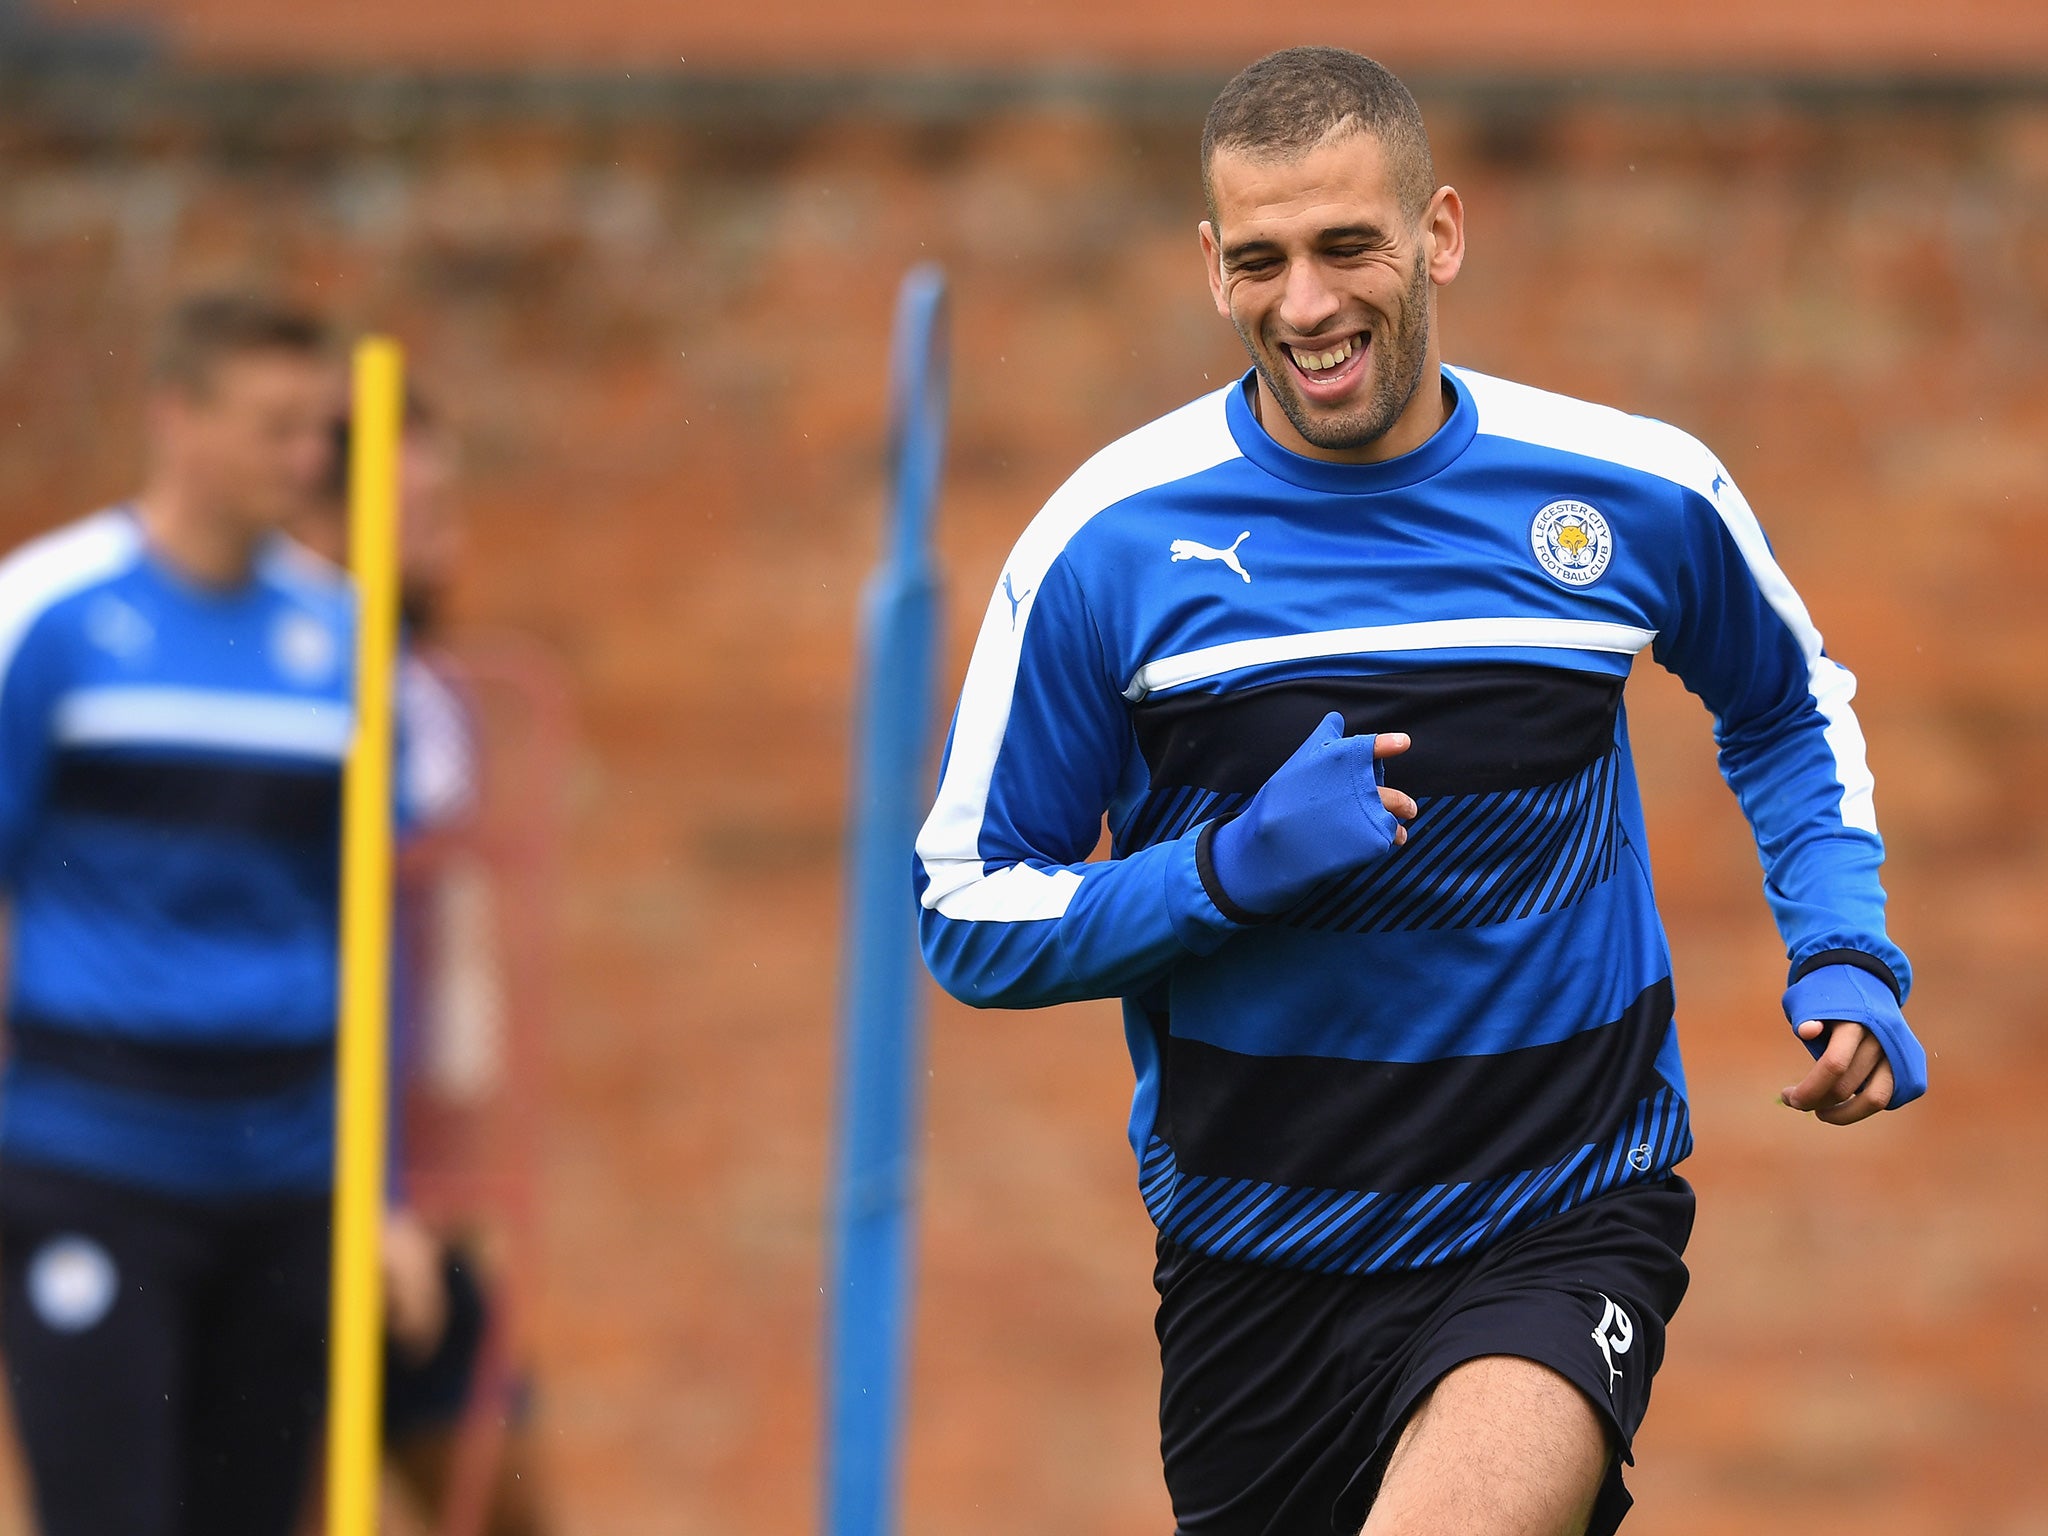 Slimani in training ahead of Tuesday's clash with Porto